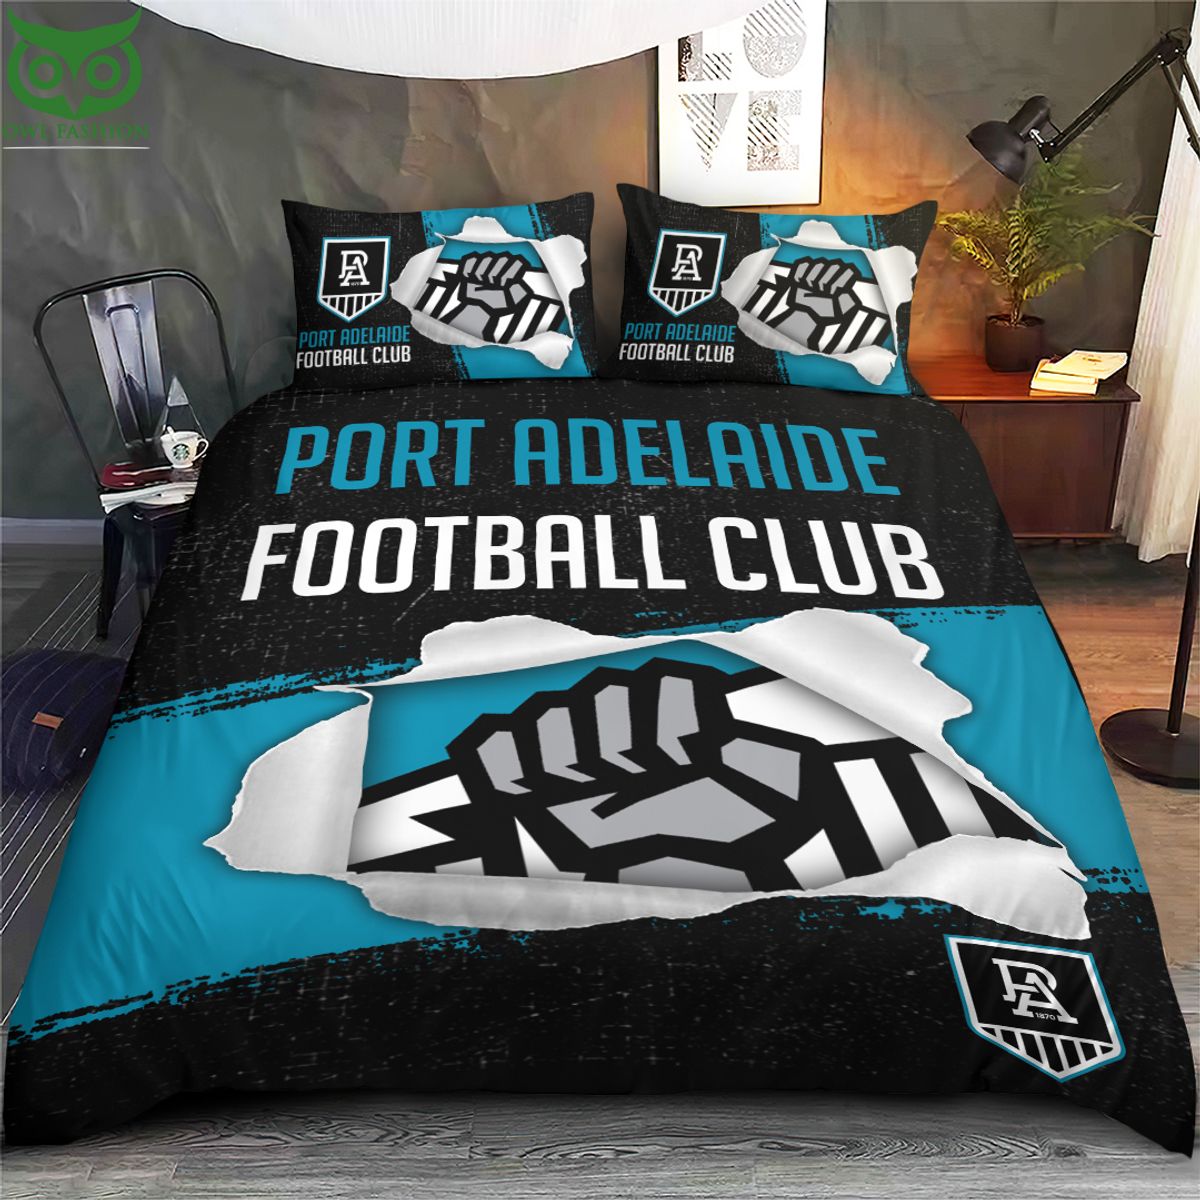 Port Adelaide Football Club Bedding set Best picture ever